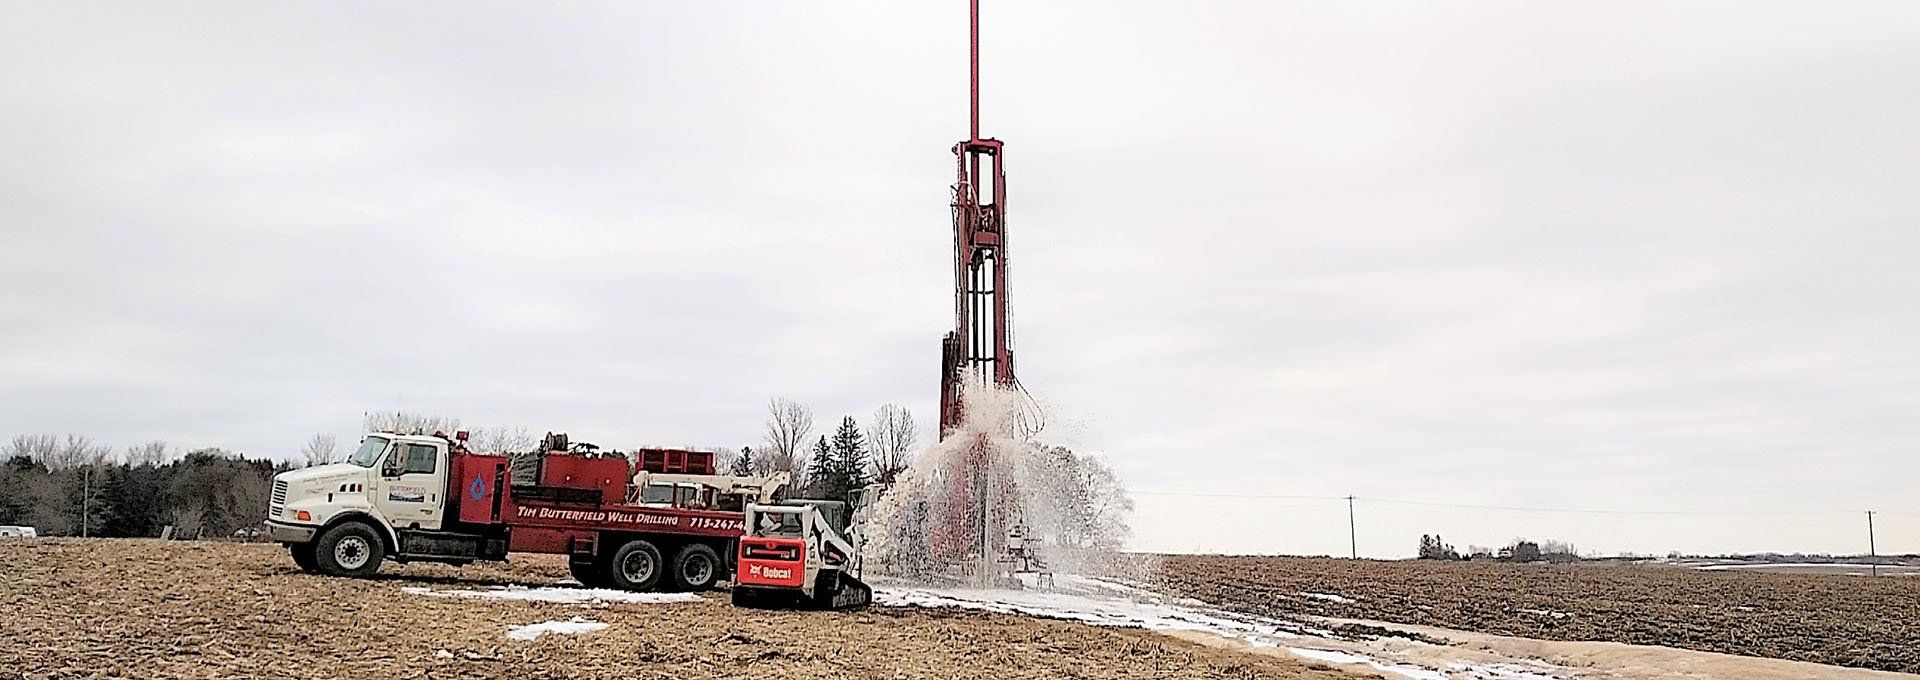 Brad malley well drilling inc